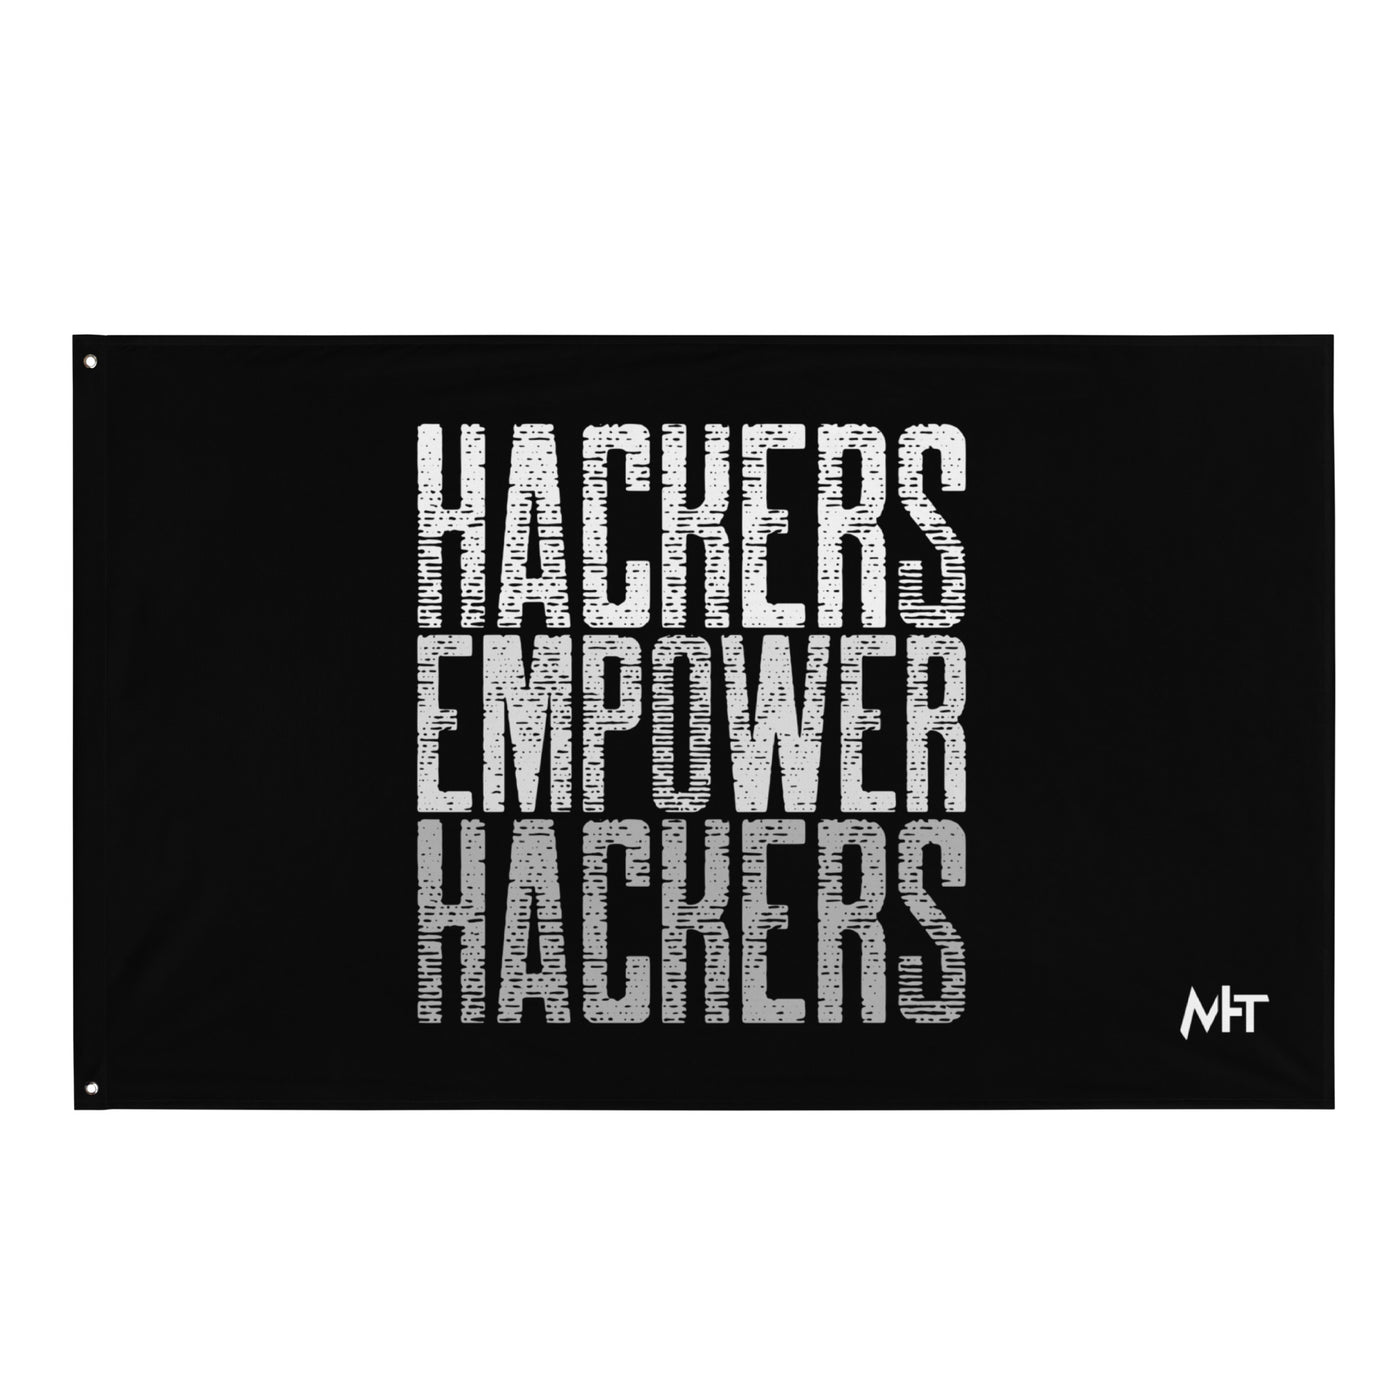 Hackers Empower Hackers V1 - Flag